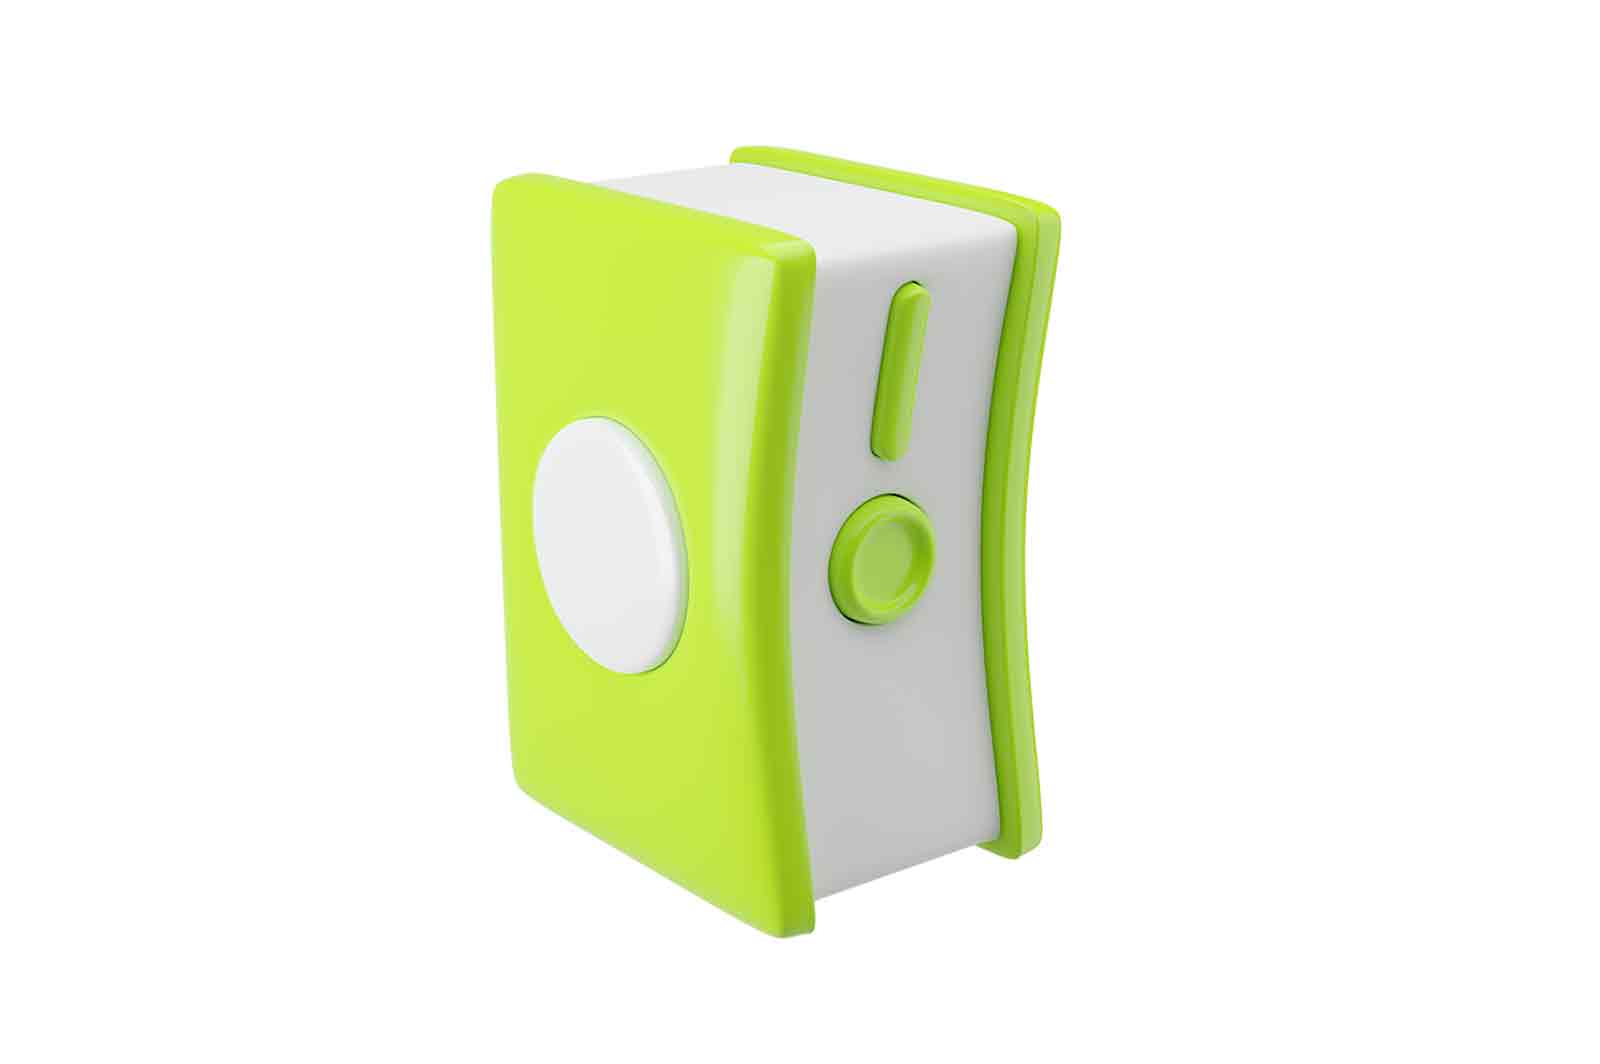 3D rendered illustration of game console Device. White with green screen, yellow directional pad, and two black buttons.